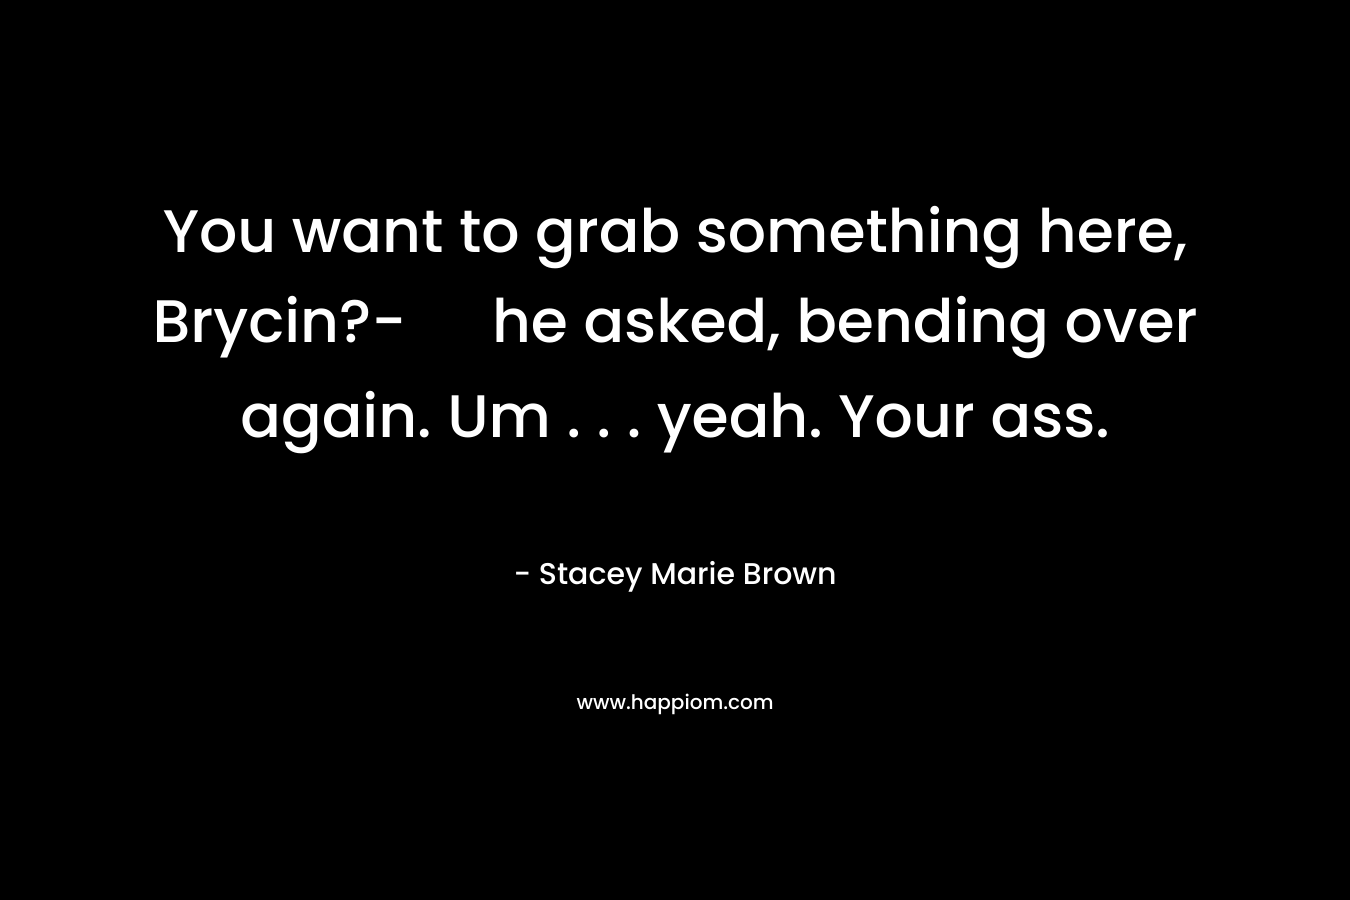 You want to grab something here, Brycin?- he asked, bending over again. Um . . . yeah. Your ass. – Stacey Marie Brown